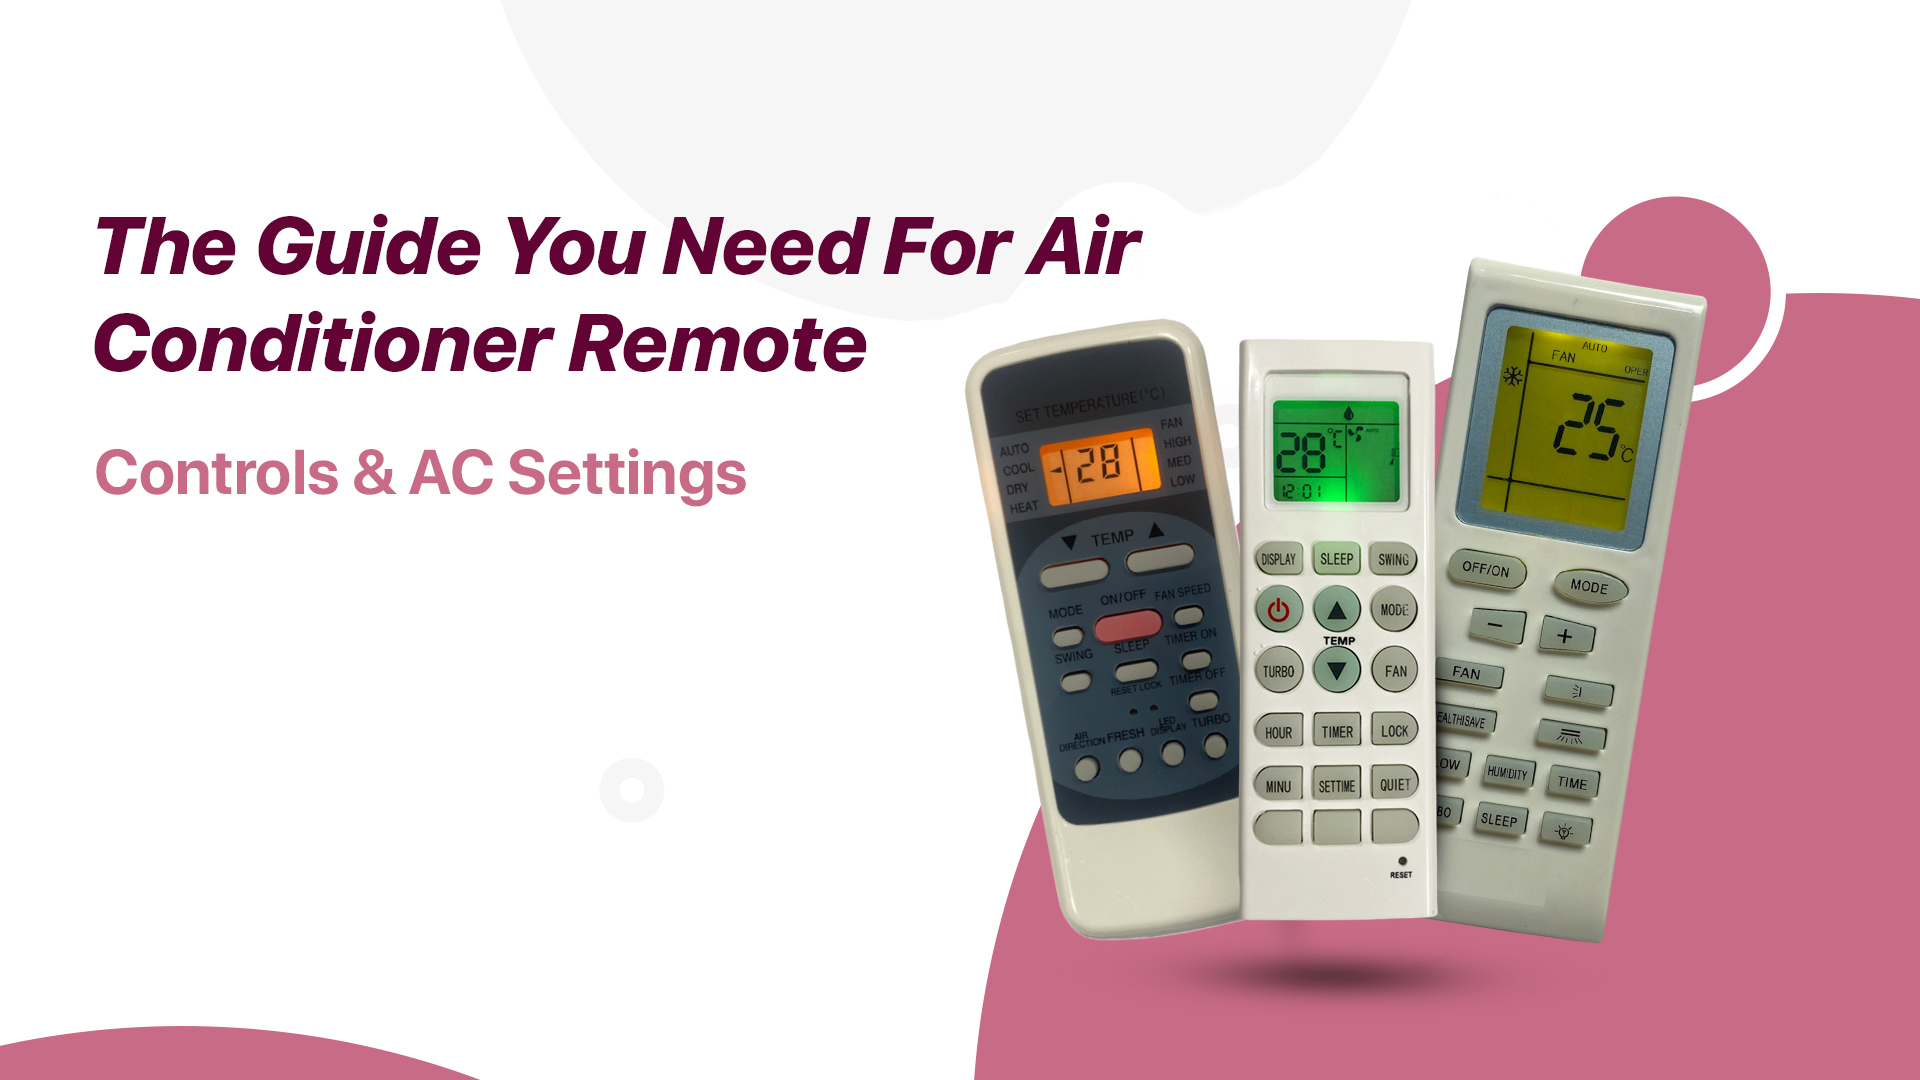 The Guide You Need For Air Conditioner Remote Controls & AC Settings